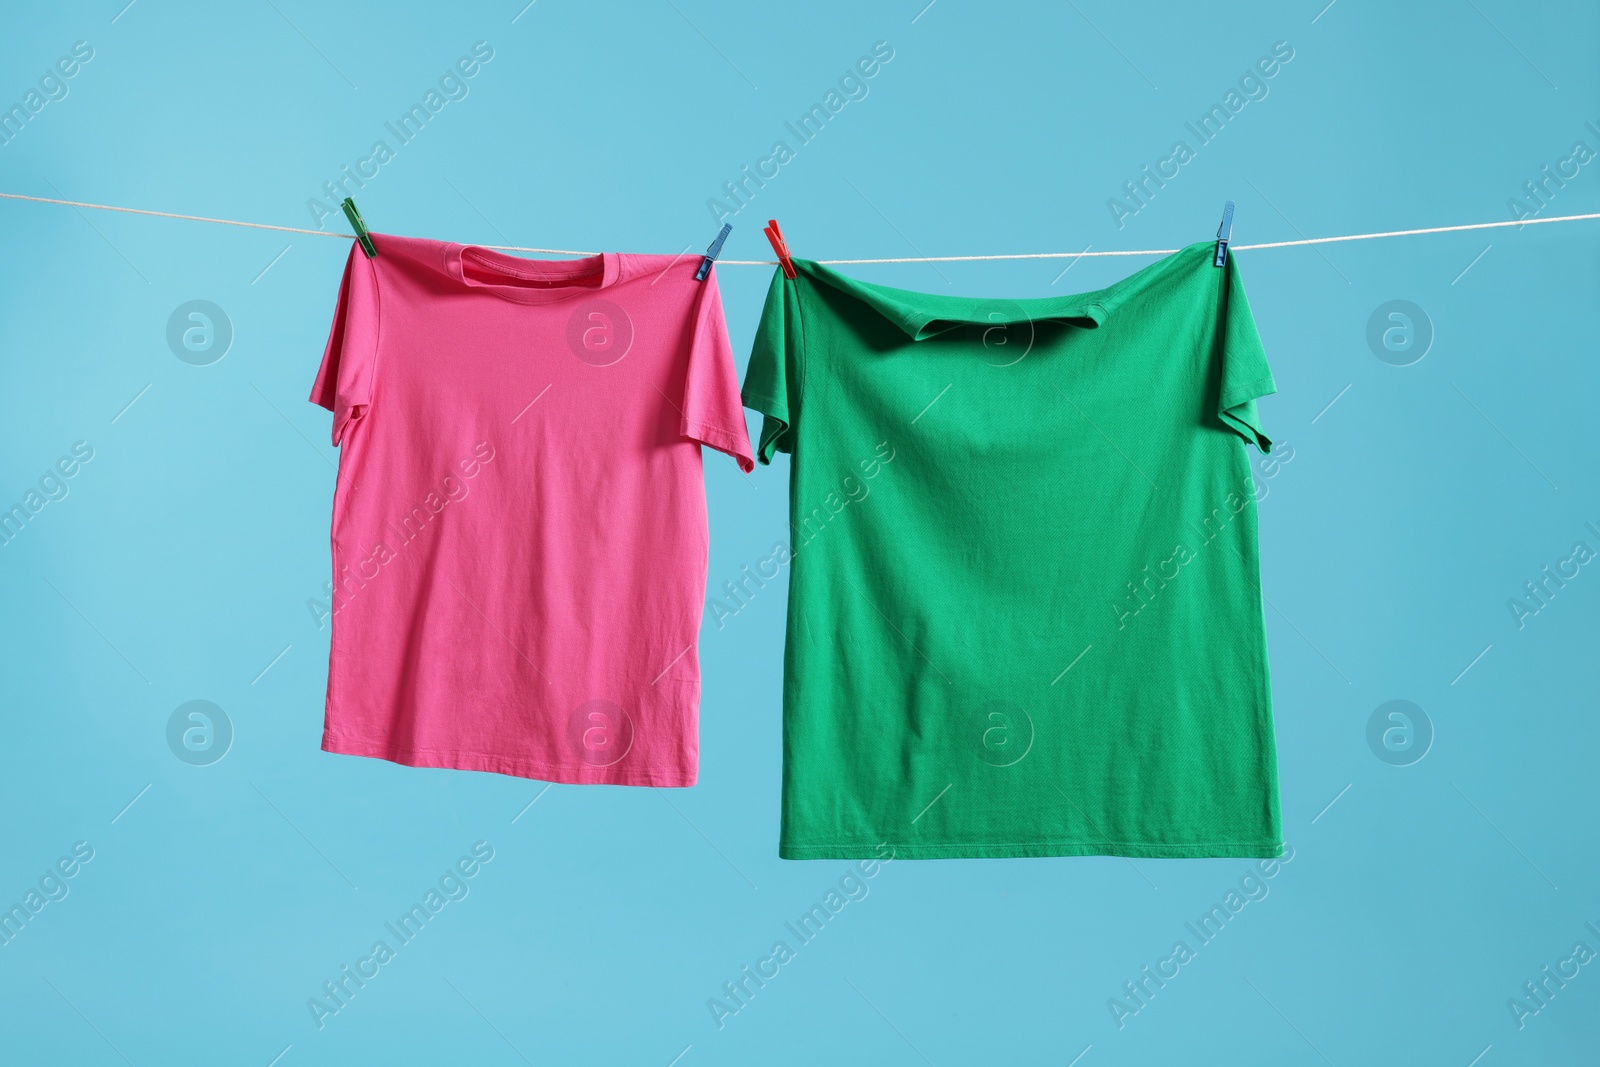 Photo of Two colorful t-shirts drying on washing line against light blue background